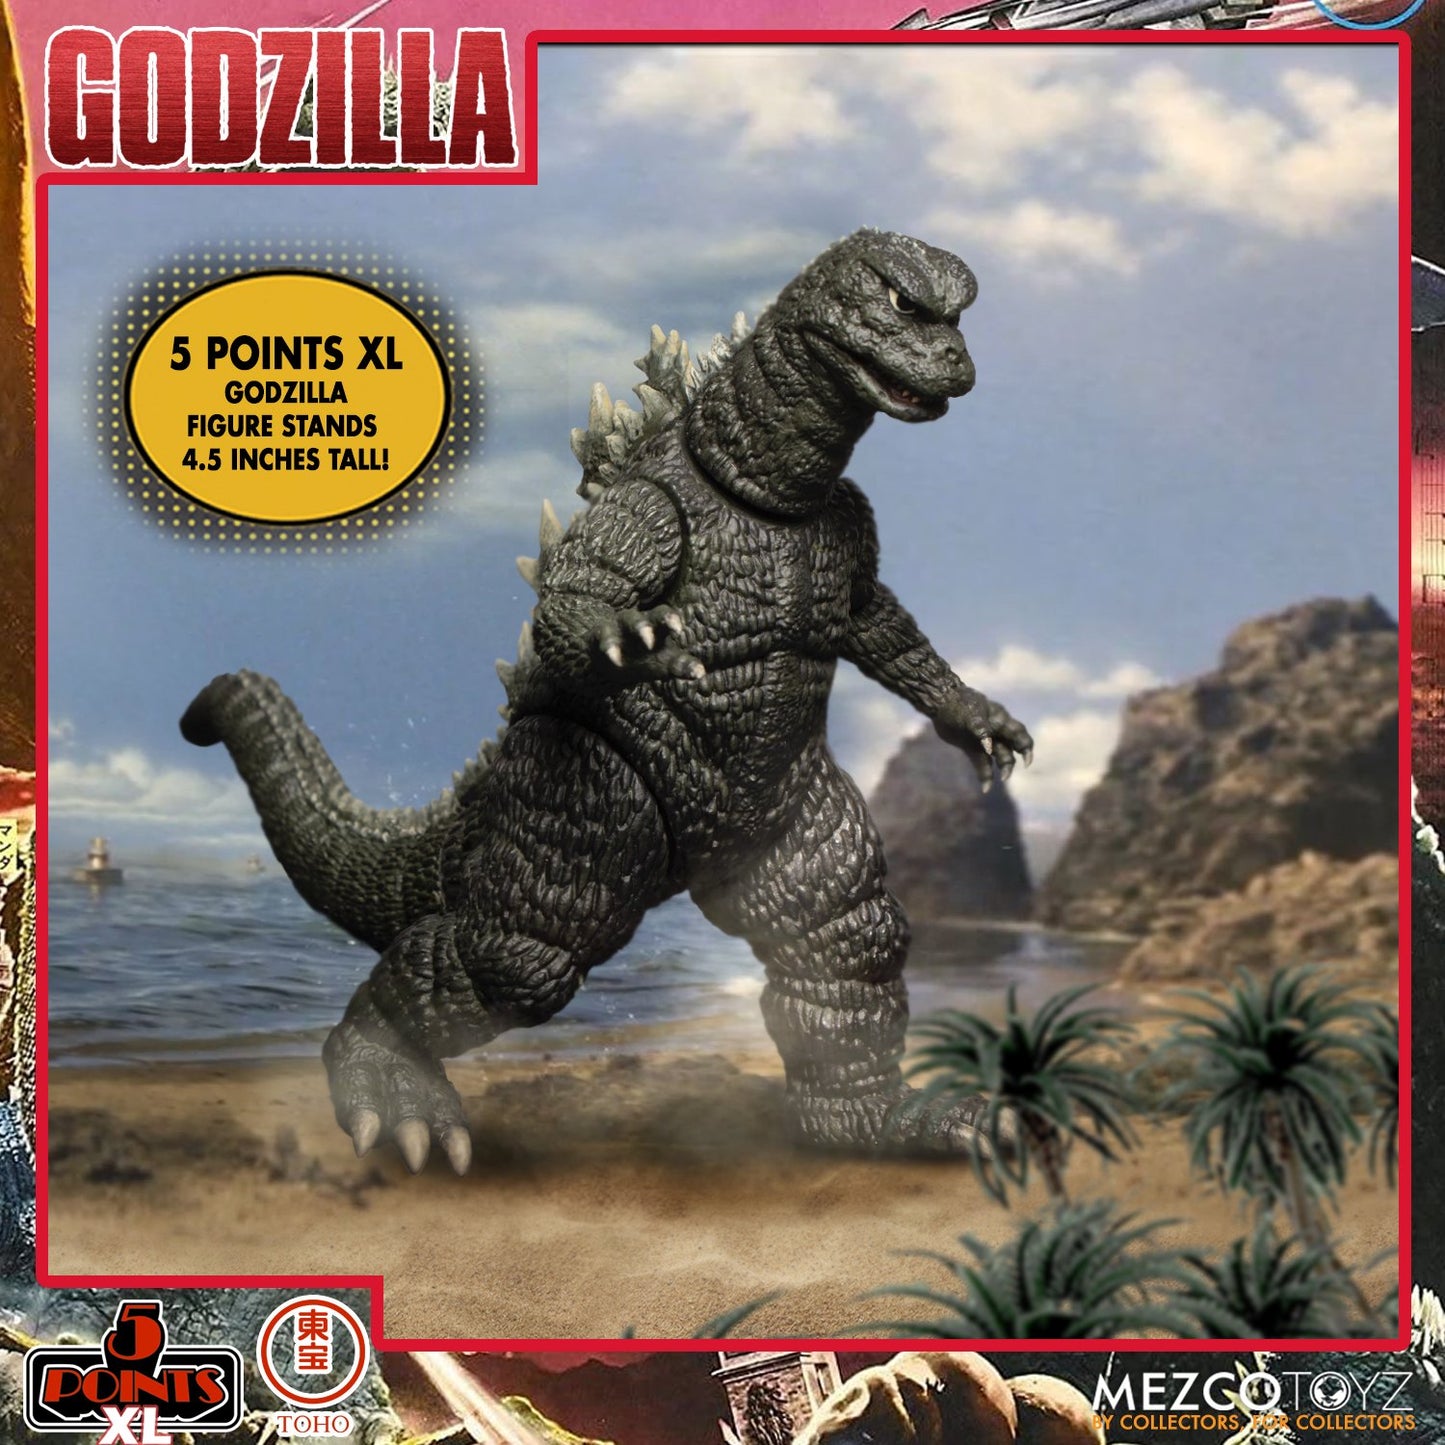 5 Points XL Godzilla Destroy All Monsters Round 1 Boxed Set